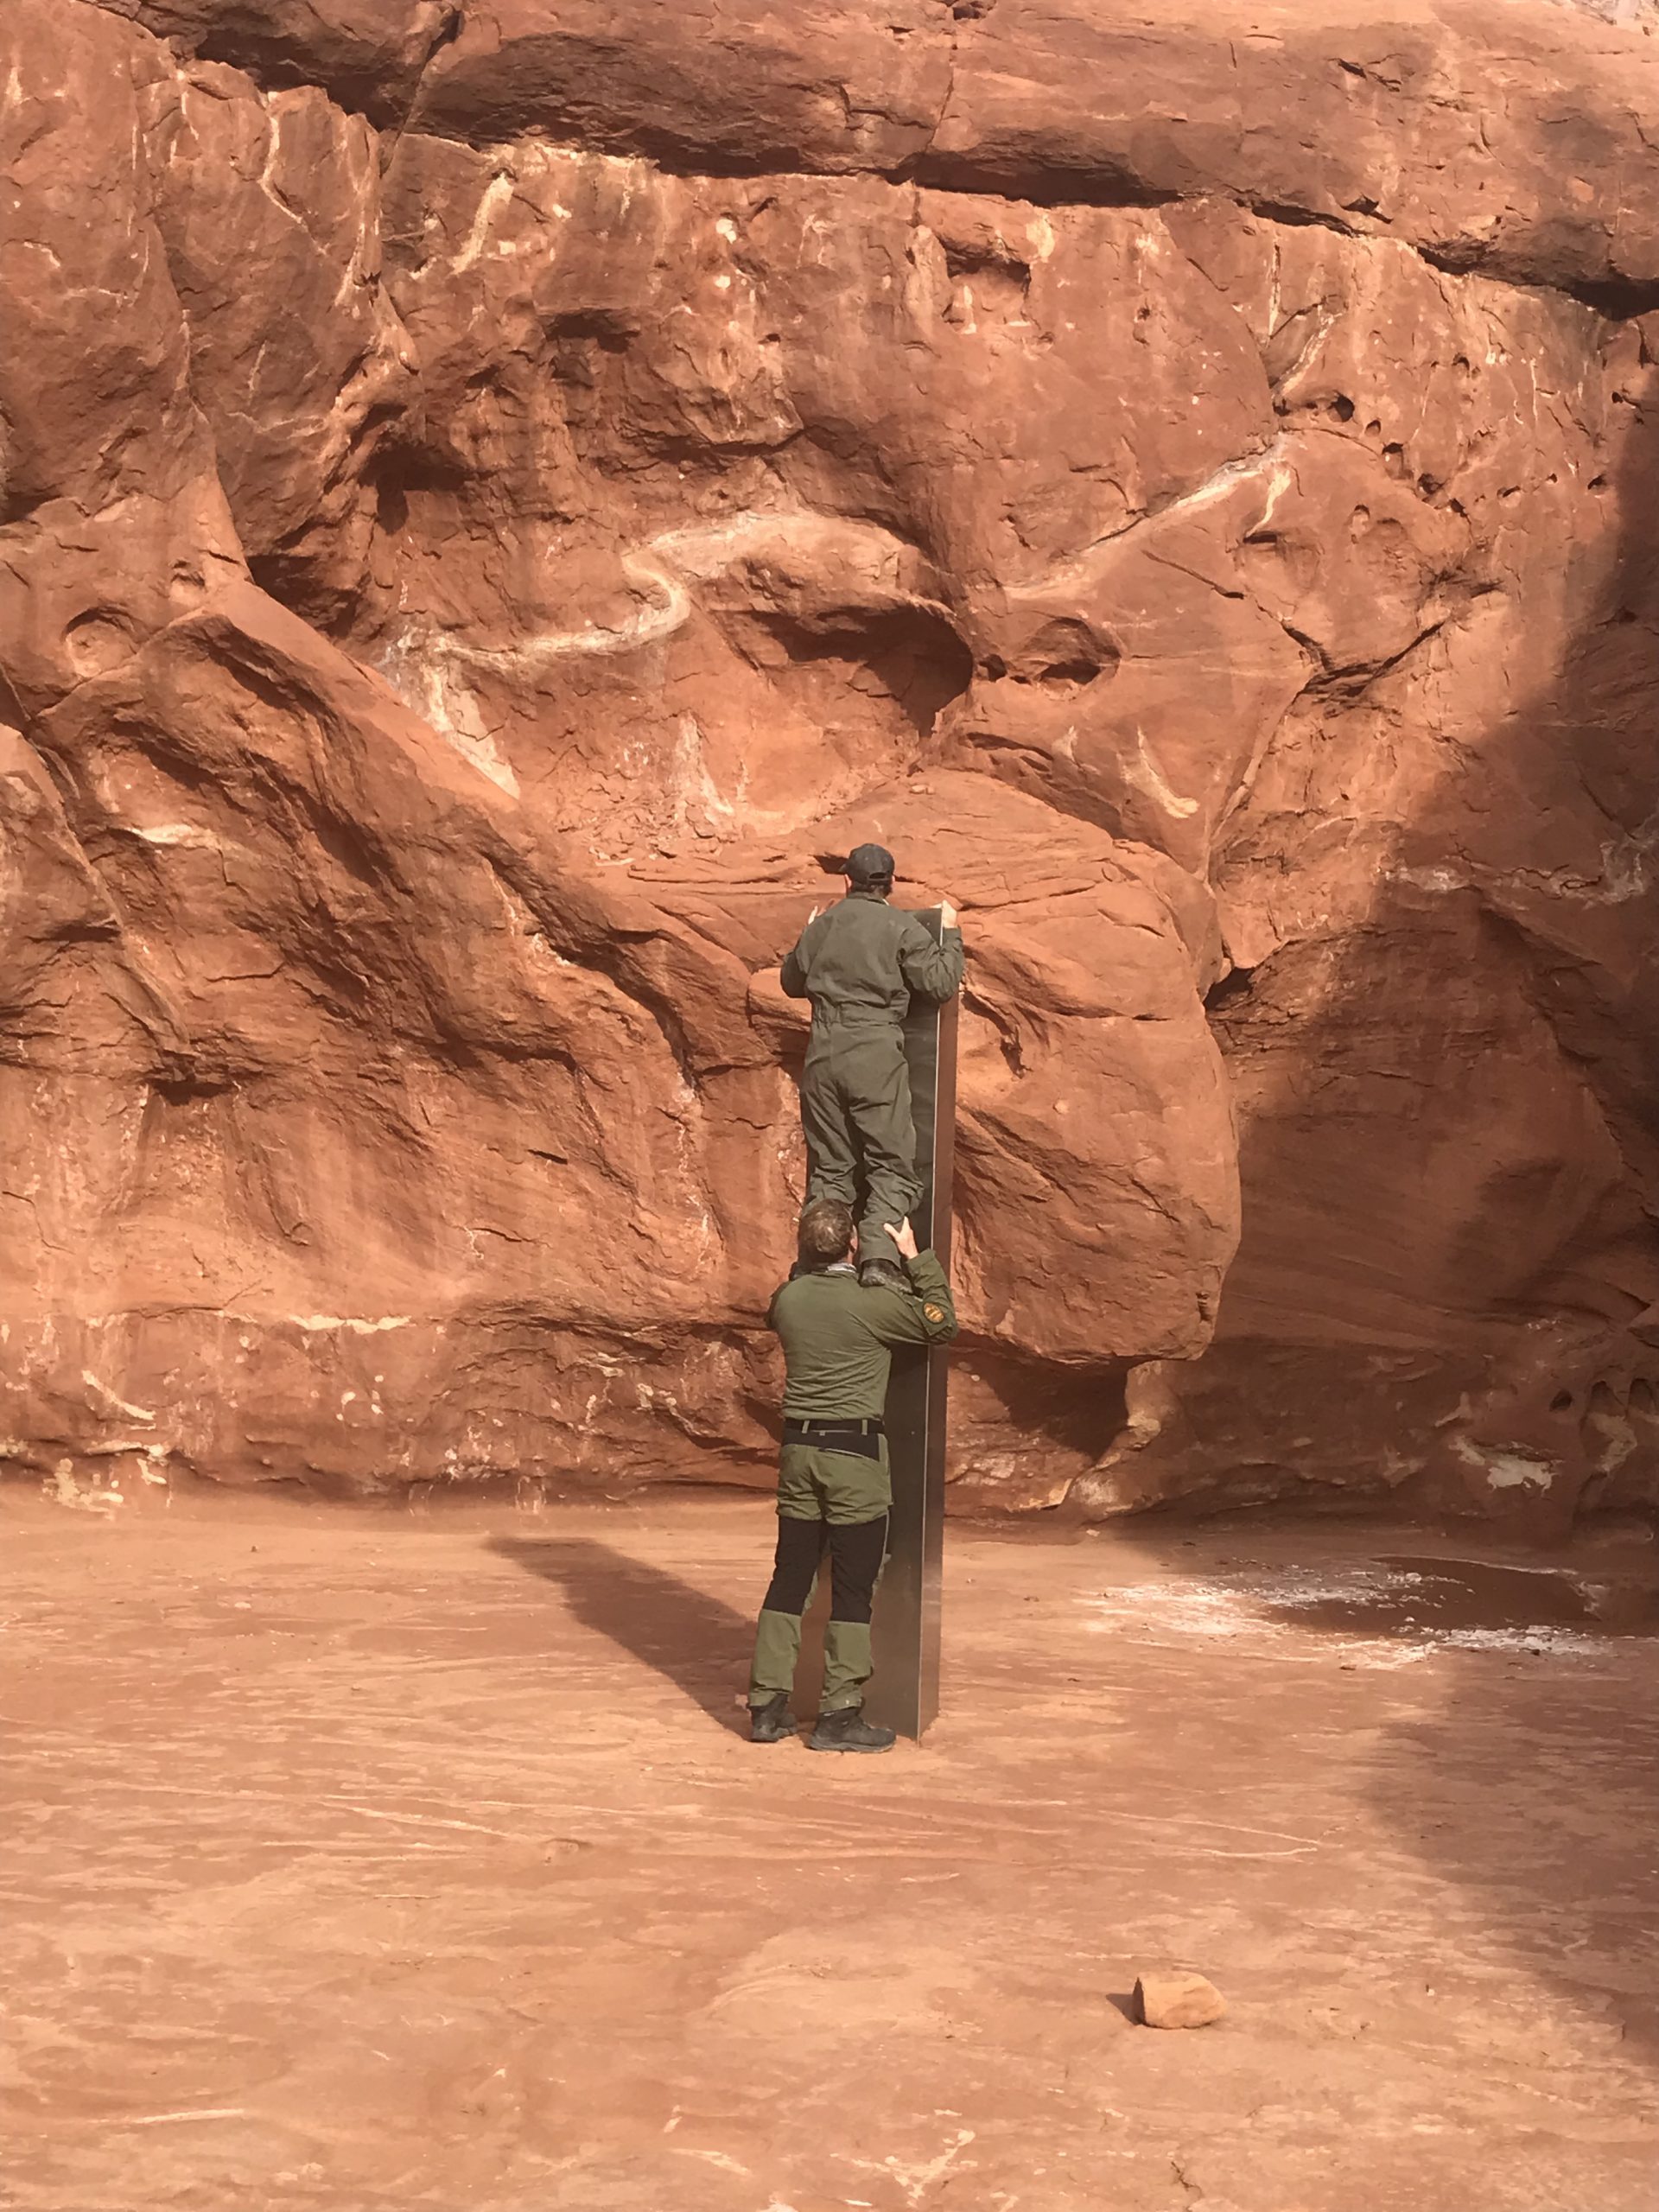 Two crew members - one standing on the other's shoulders - from the DPS Aero Bureau mission stands next to the metal monolith implanted in the ground in red rock.